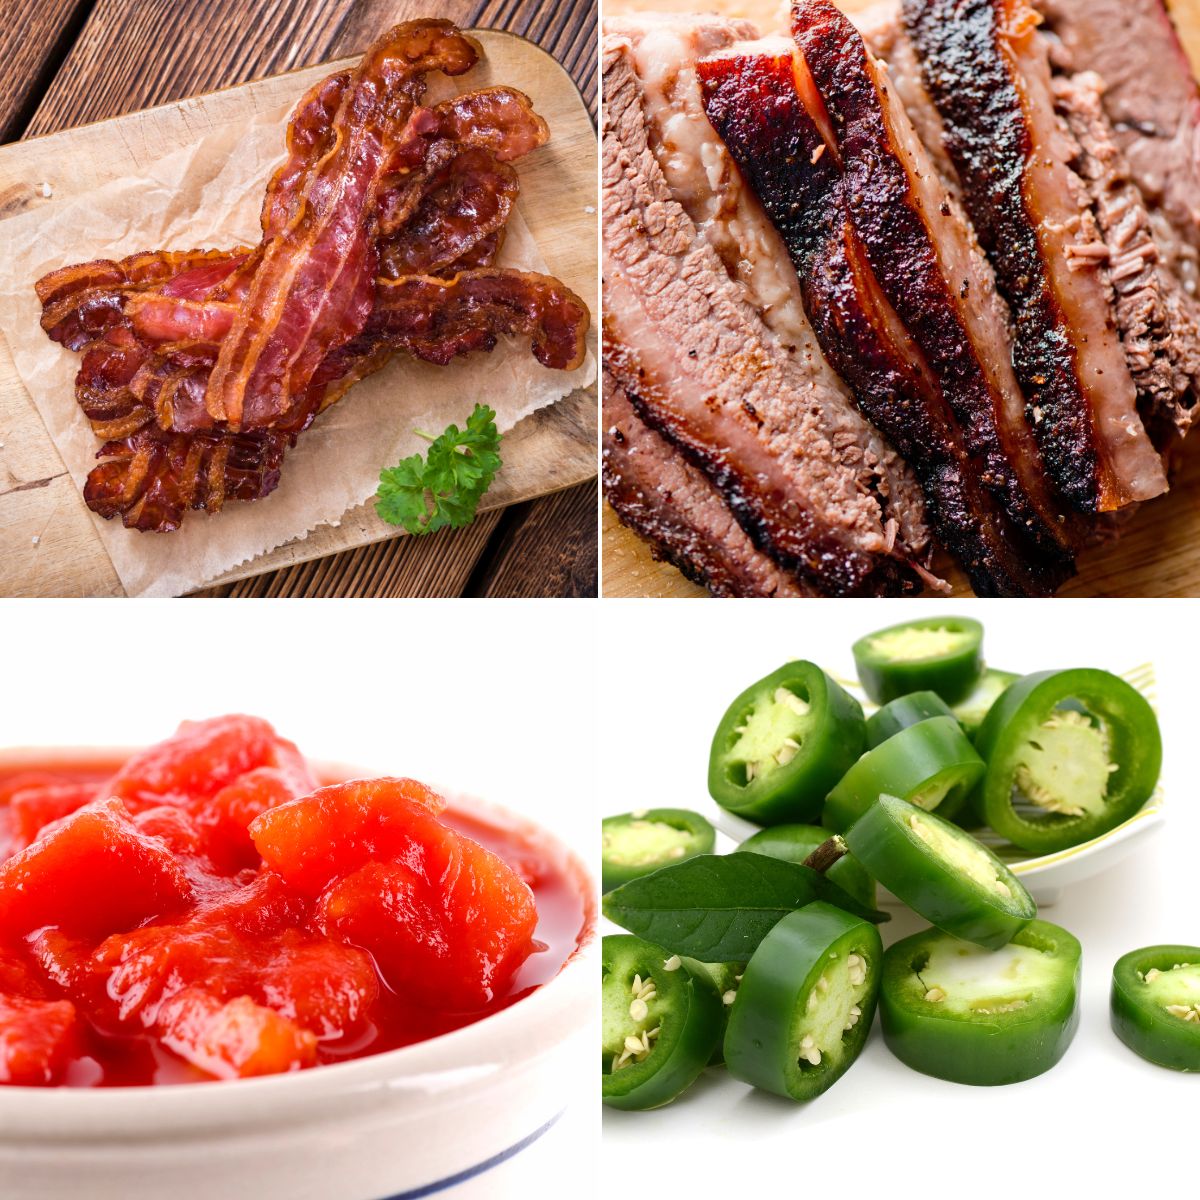 A collage of different foods, including bacon and jalapenos with brisket chili.